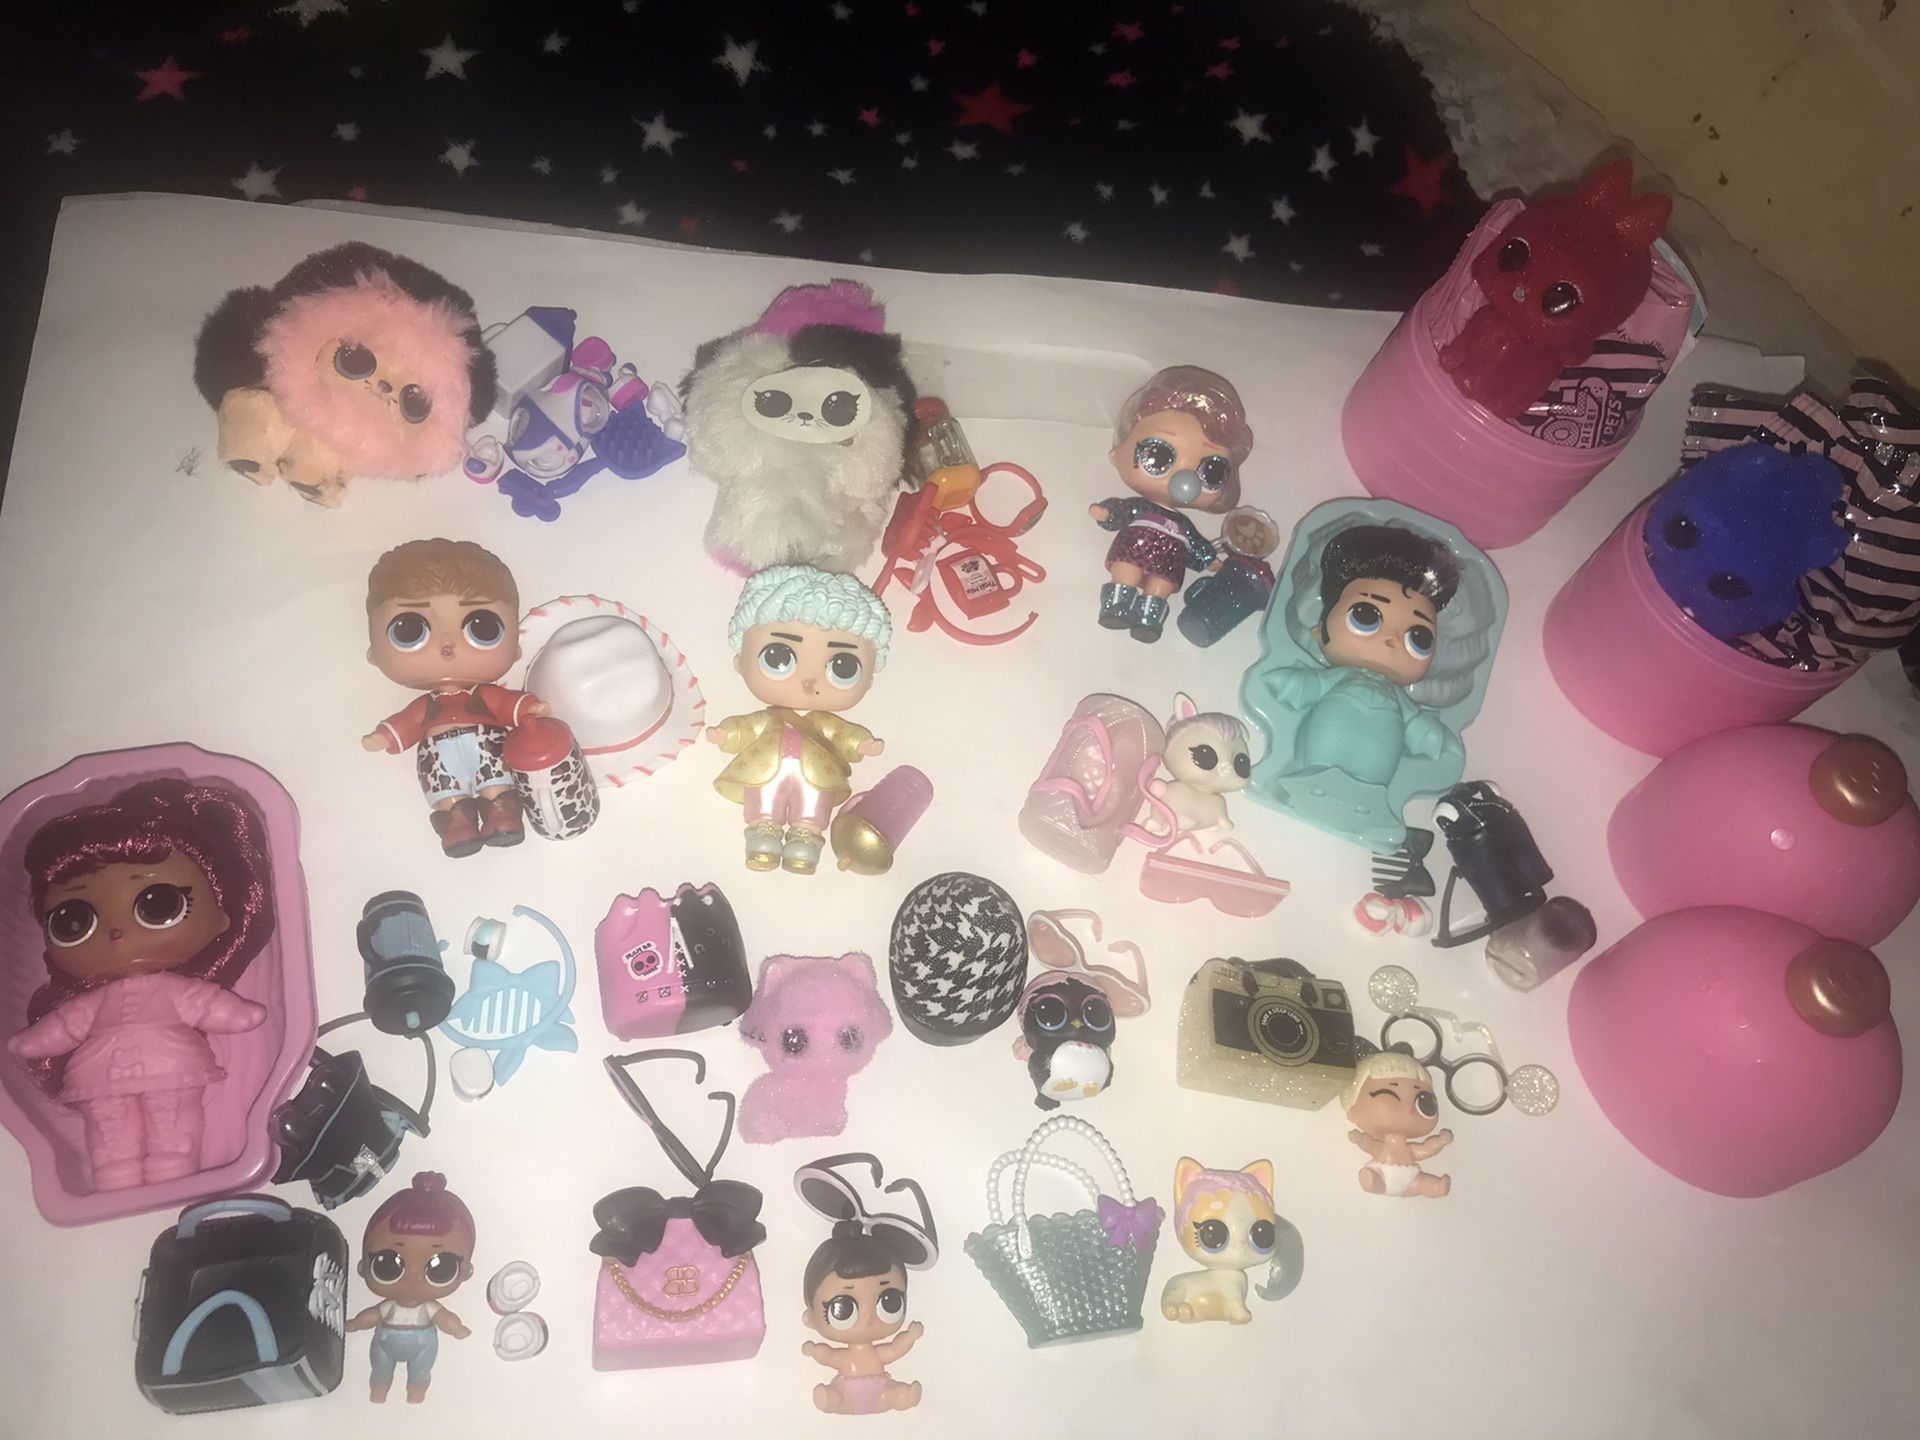 Lol surprise dolls lot of 16! Valued at well over $100